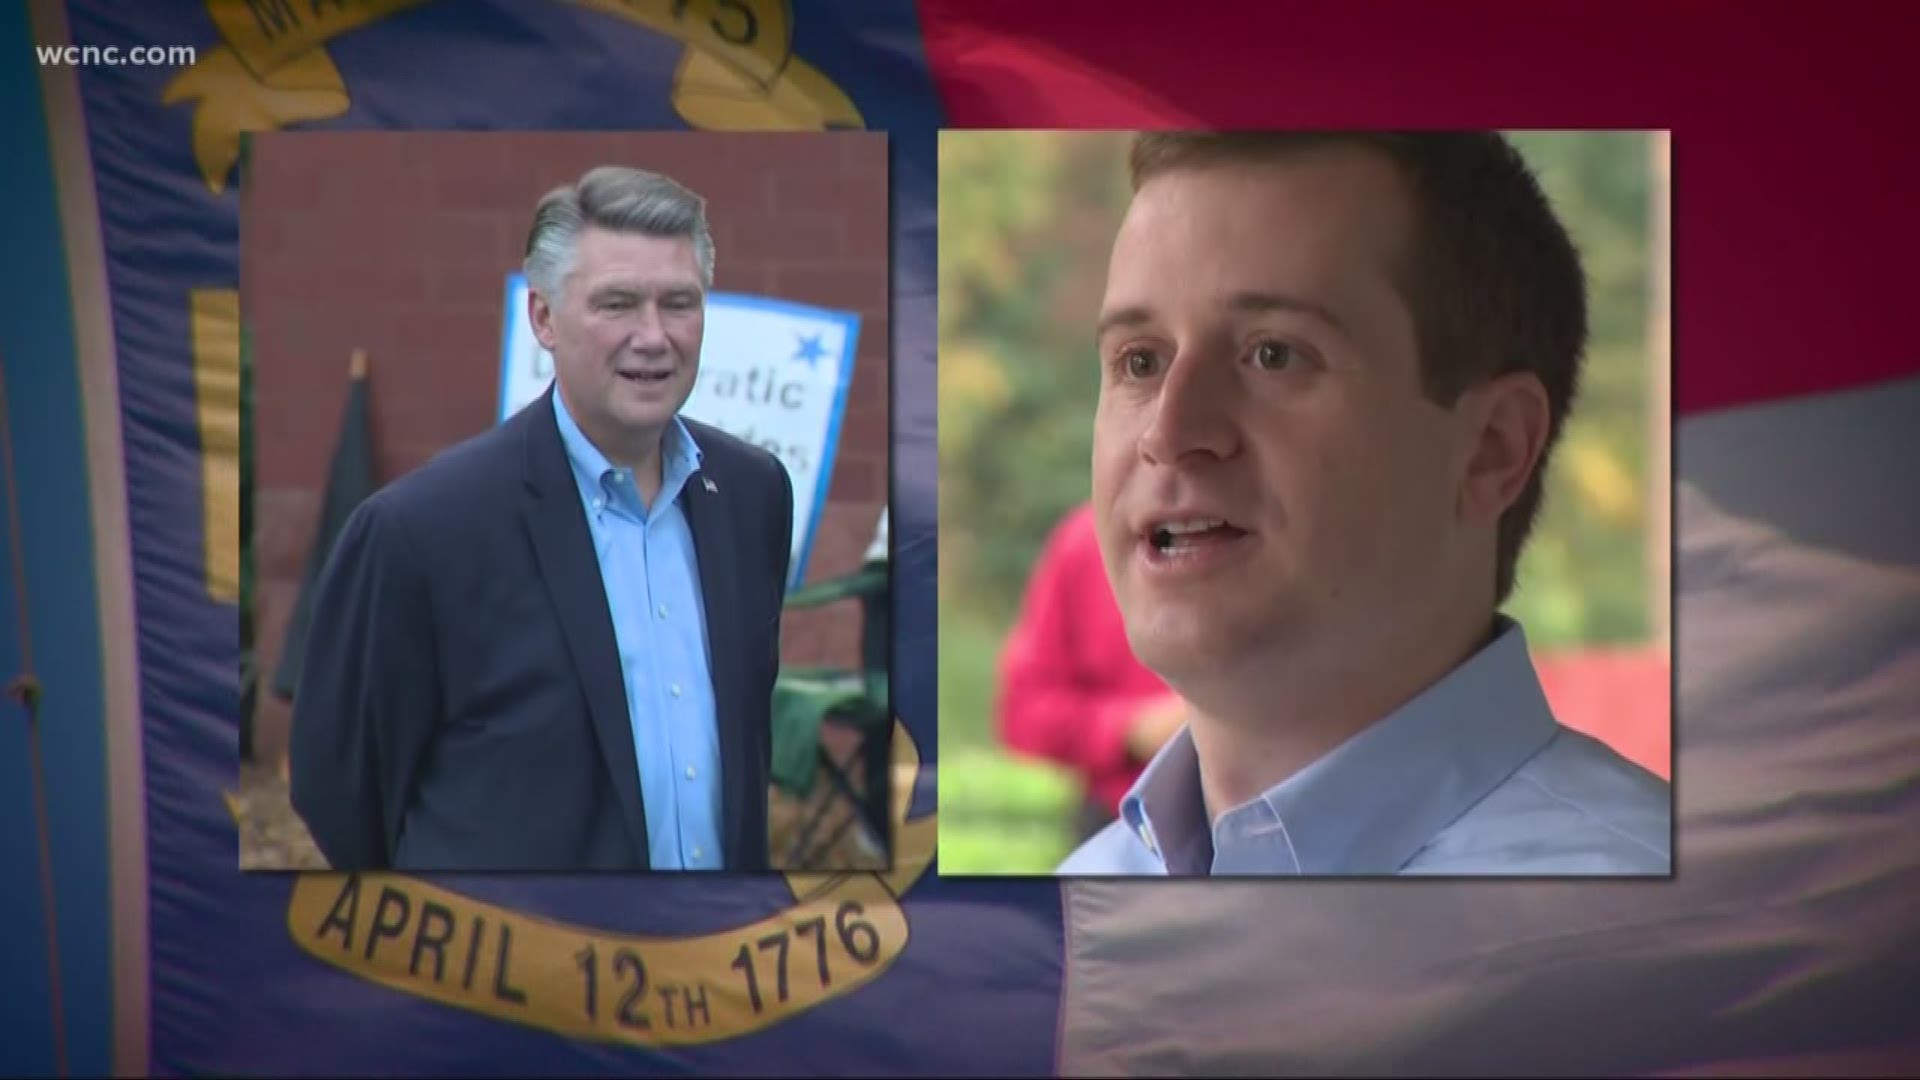 Mark Harris seemed to win the November election over Democrat, Dan McCready. However, it has been clouded by a probe into voting irregularities.